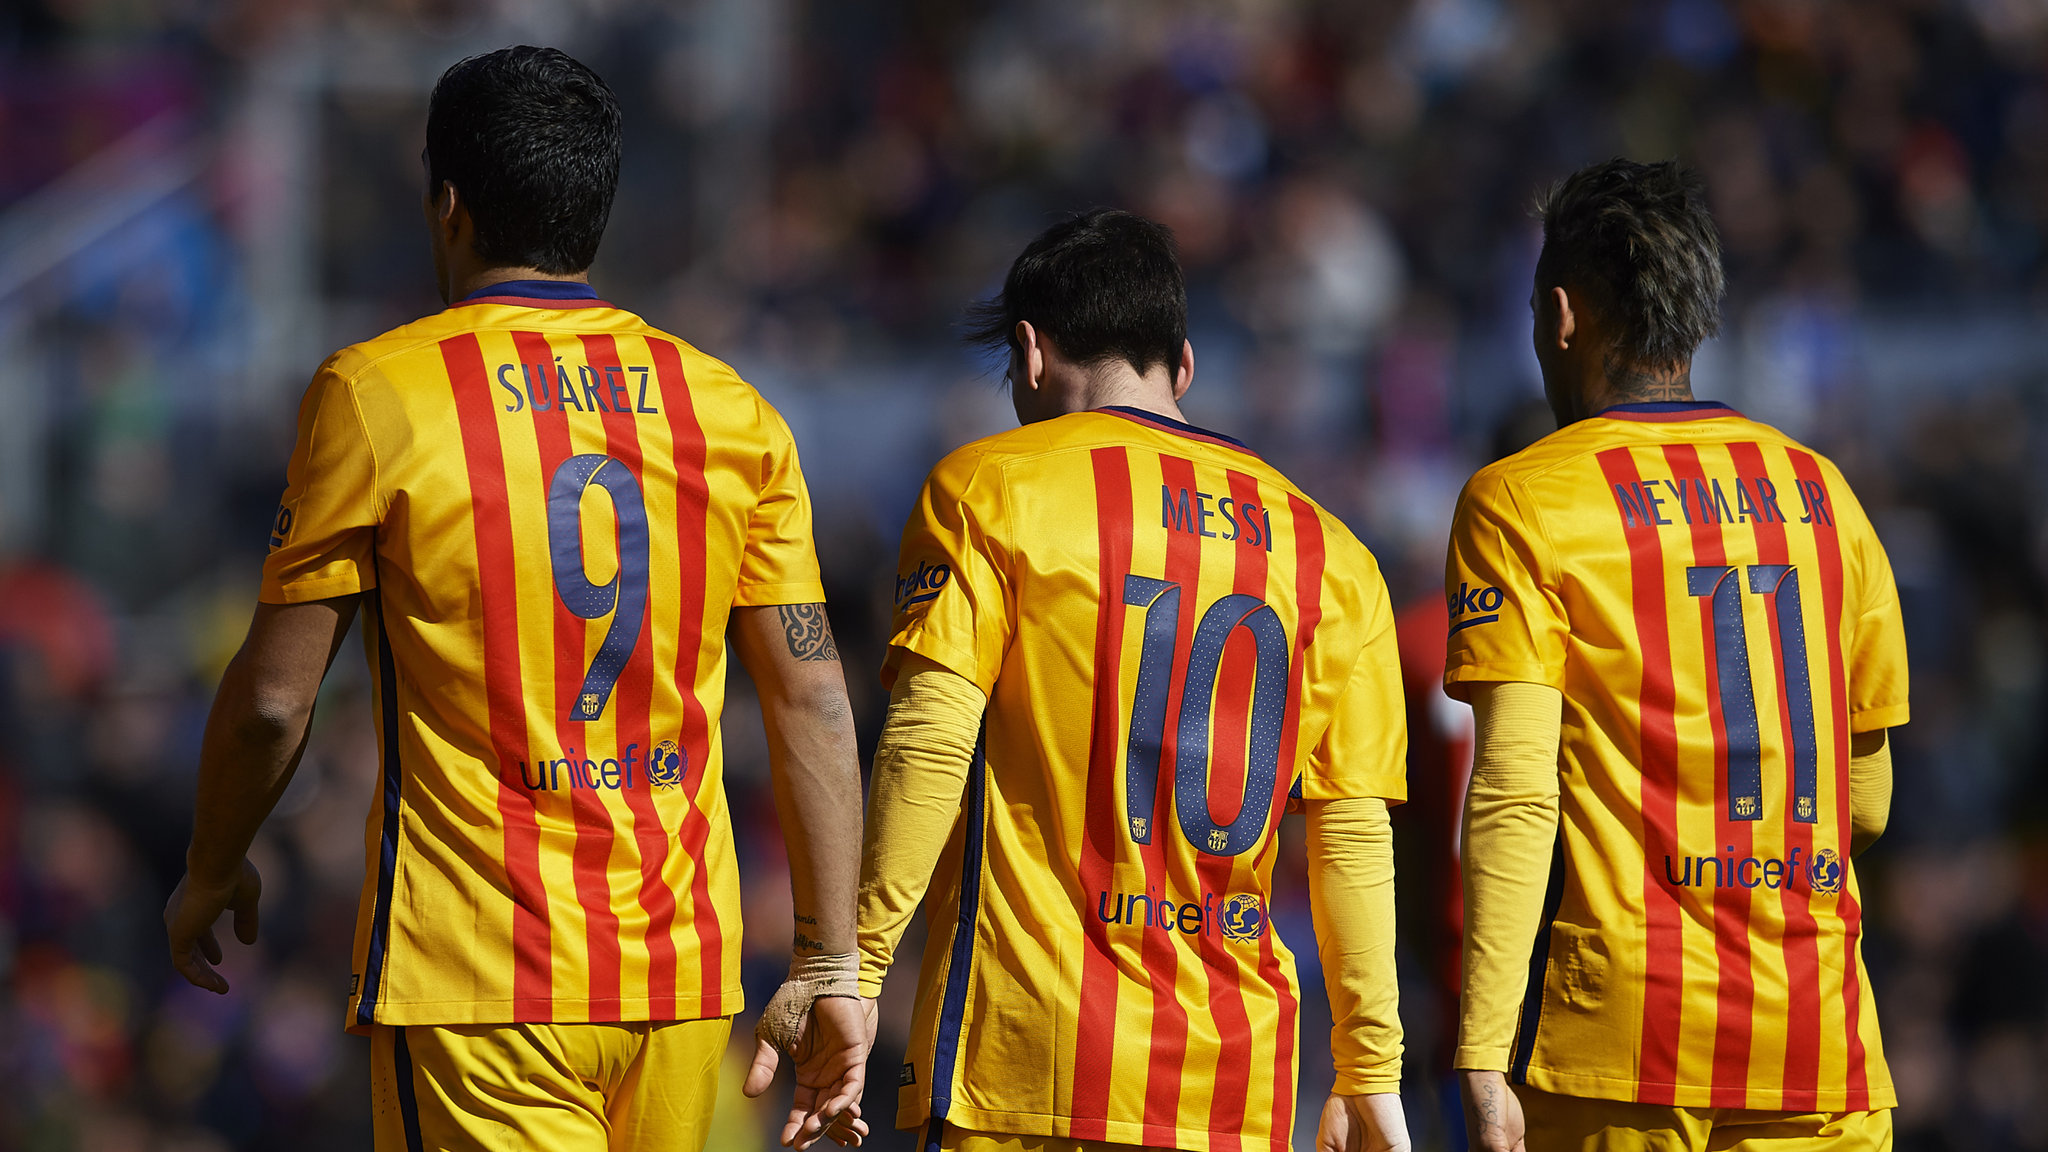 Barcelona S Big Three Have All Suffered A Dip In Form - Messi Suarez Neymar Away - HD Wallpaper 